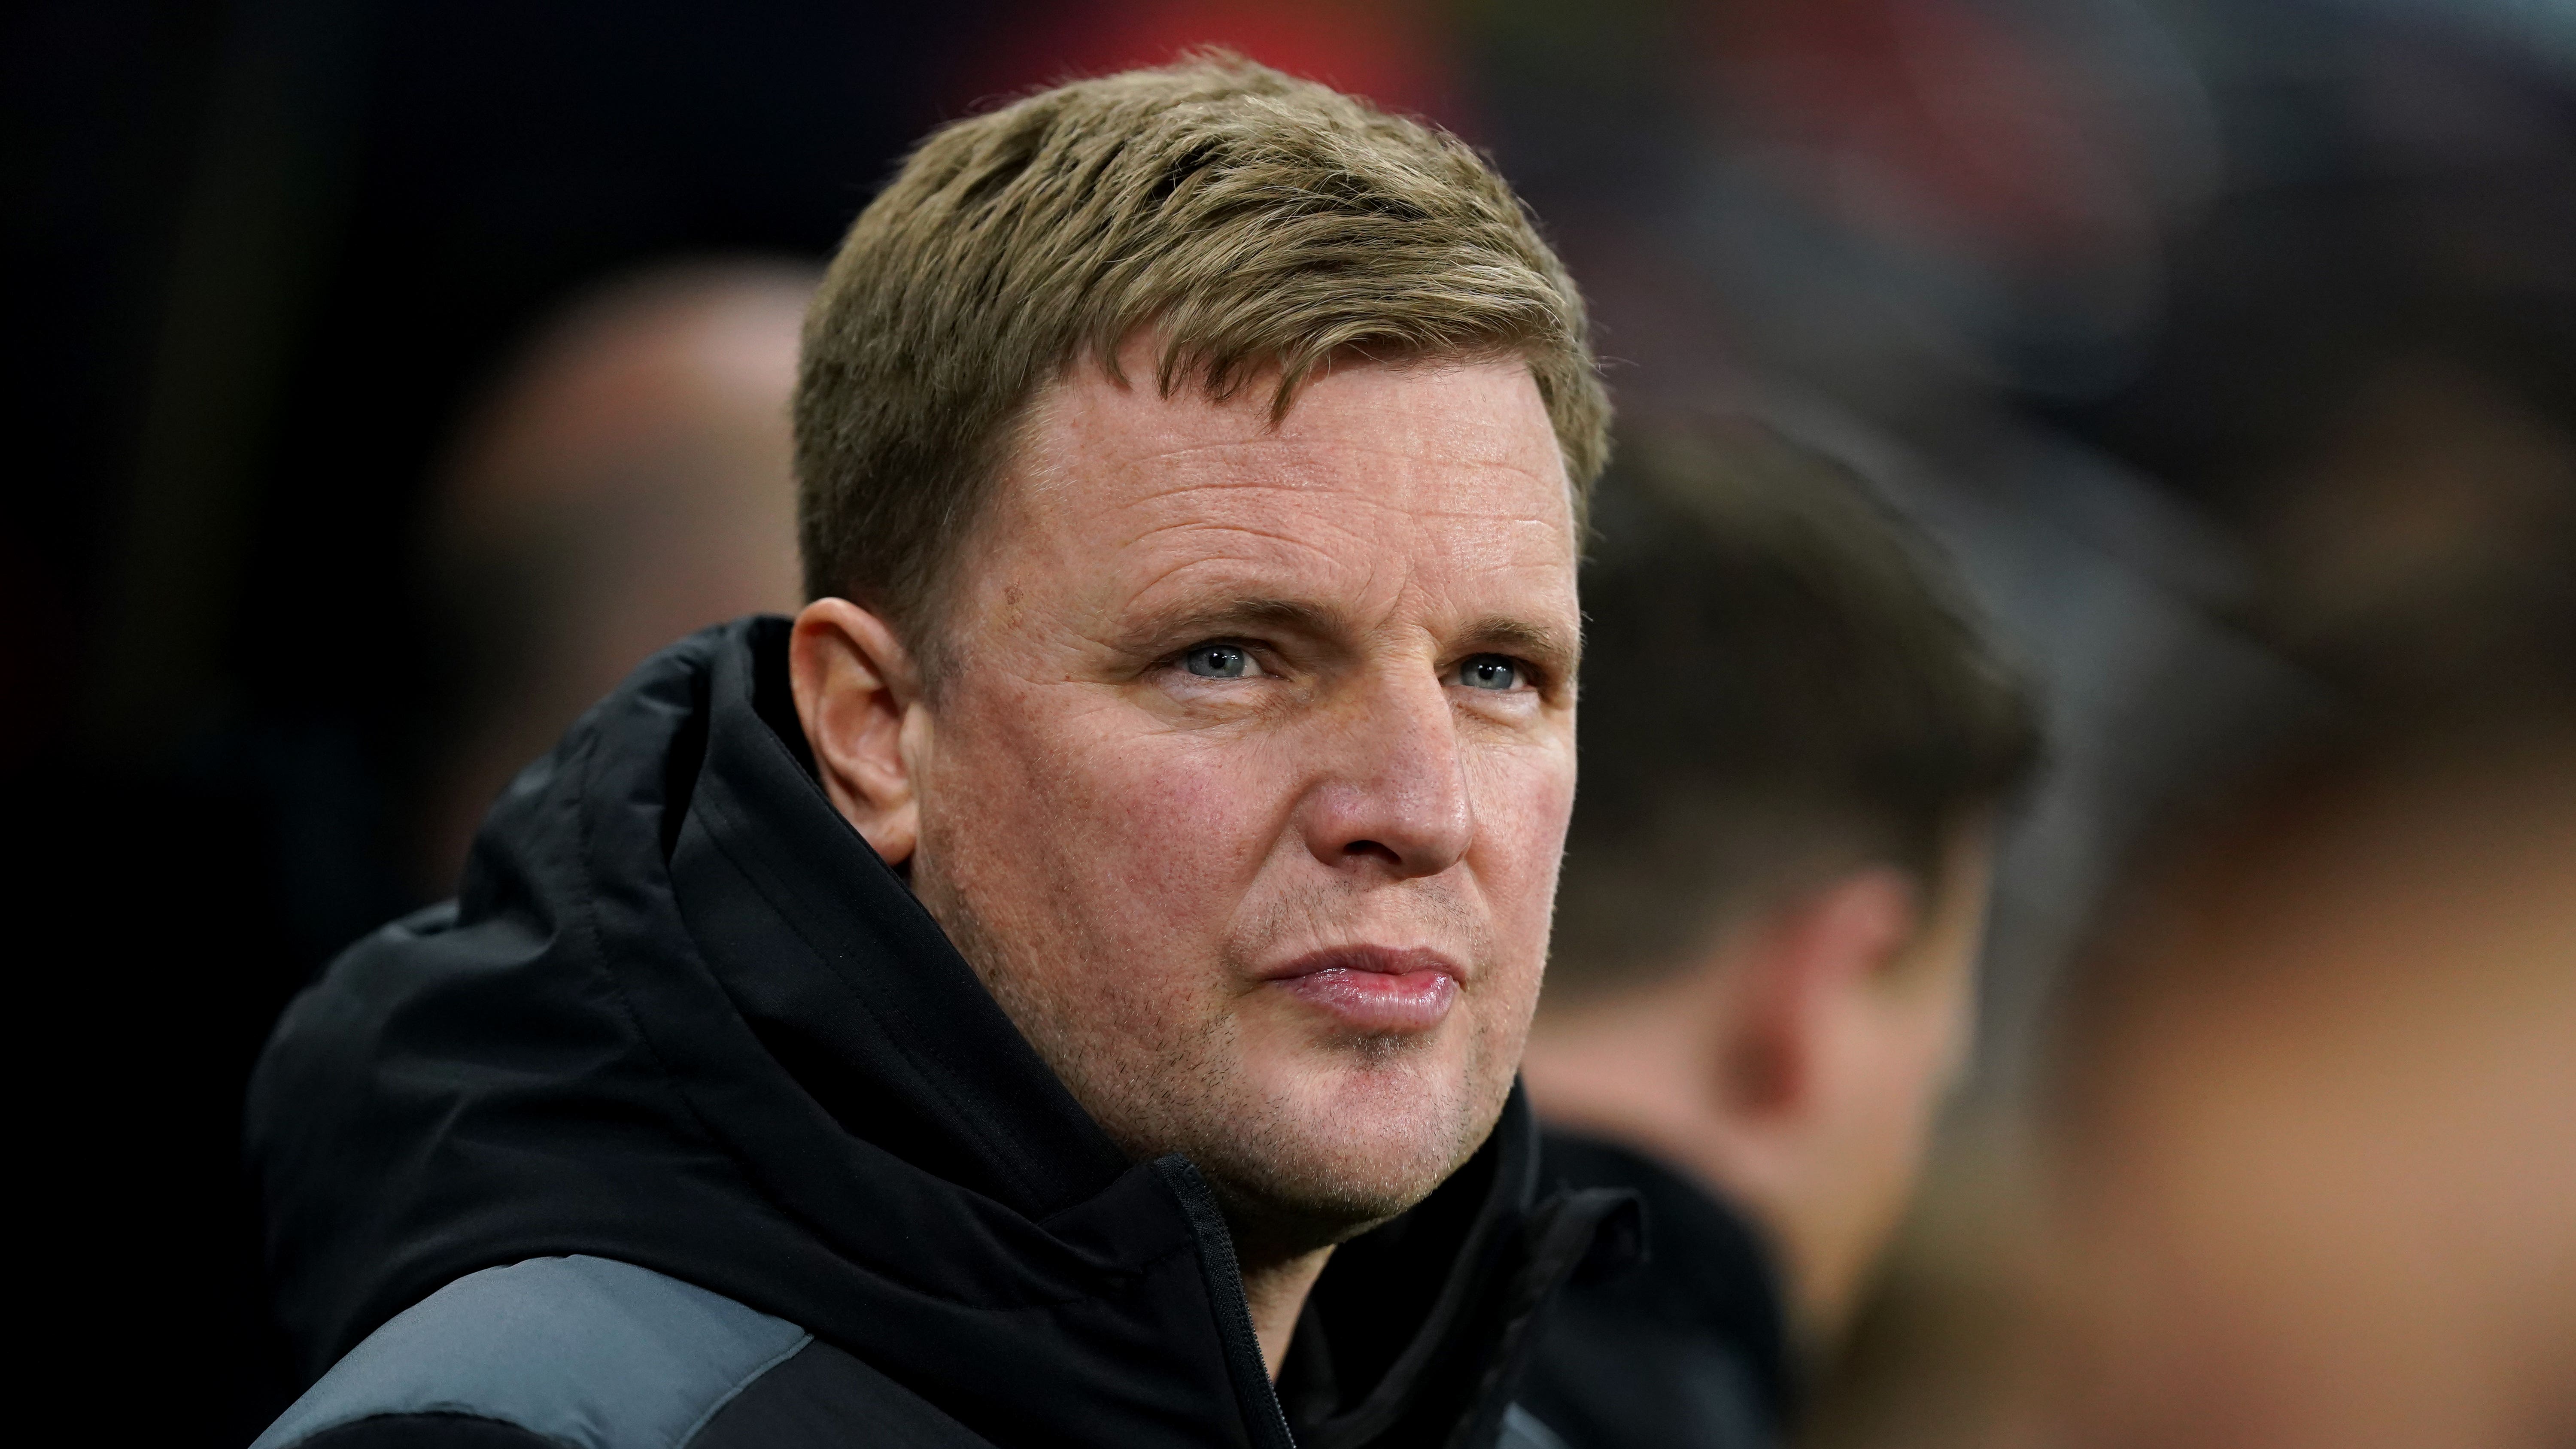 We haven’t written anything off – Eddie Howe not giving up on top-four hopes